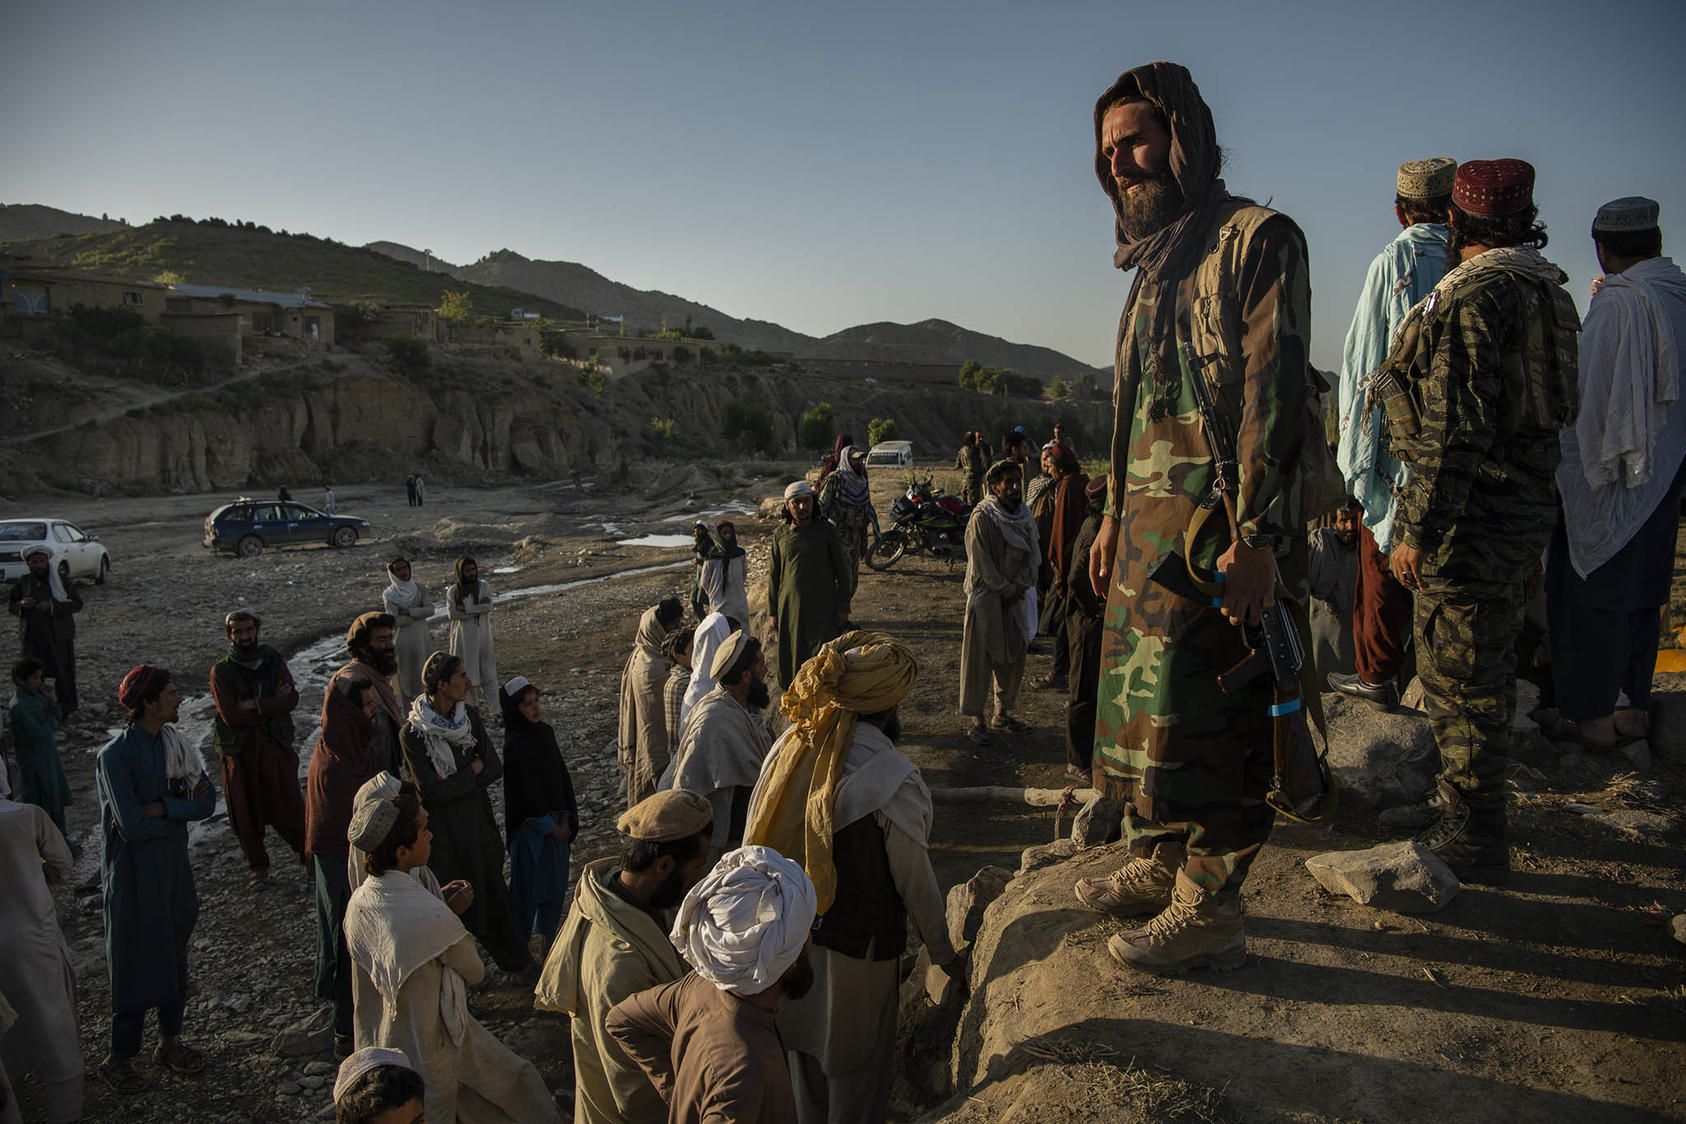  A Year After the Taliban Takeover: What’s Next for the U.S. in Afghanistan?